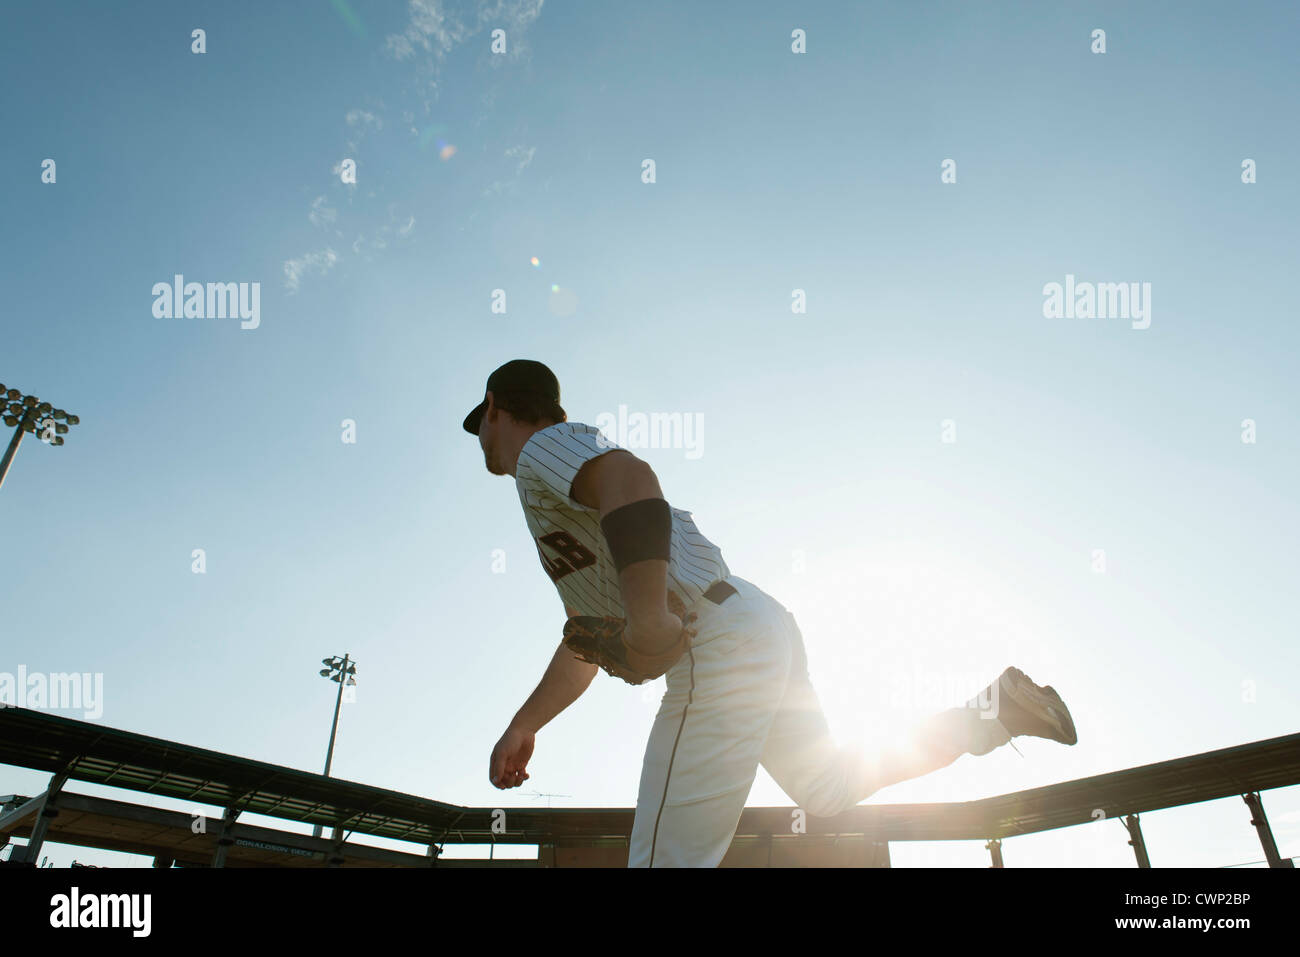 Baseball pitcher throwing pitch, backlit Stock Photo